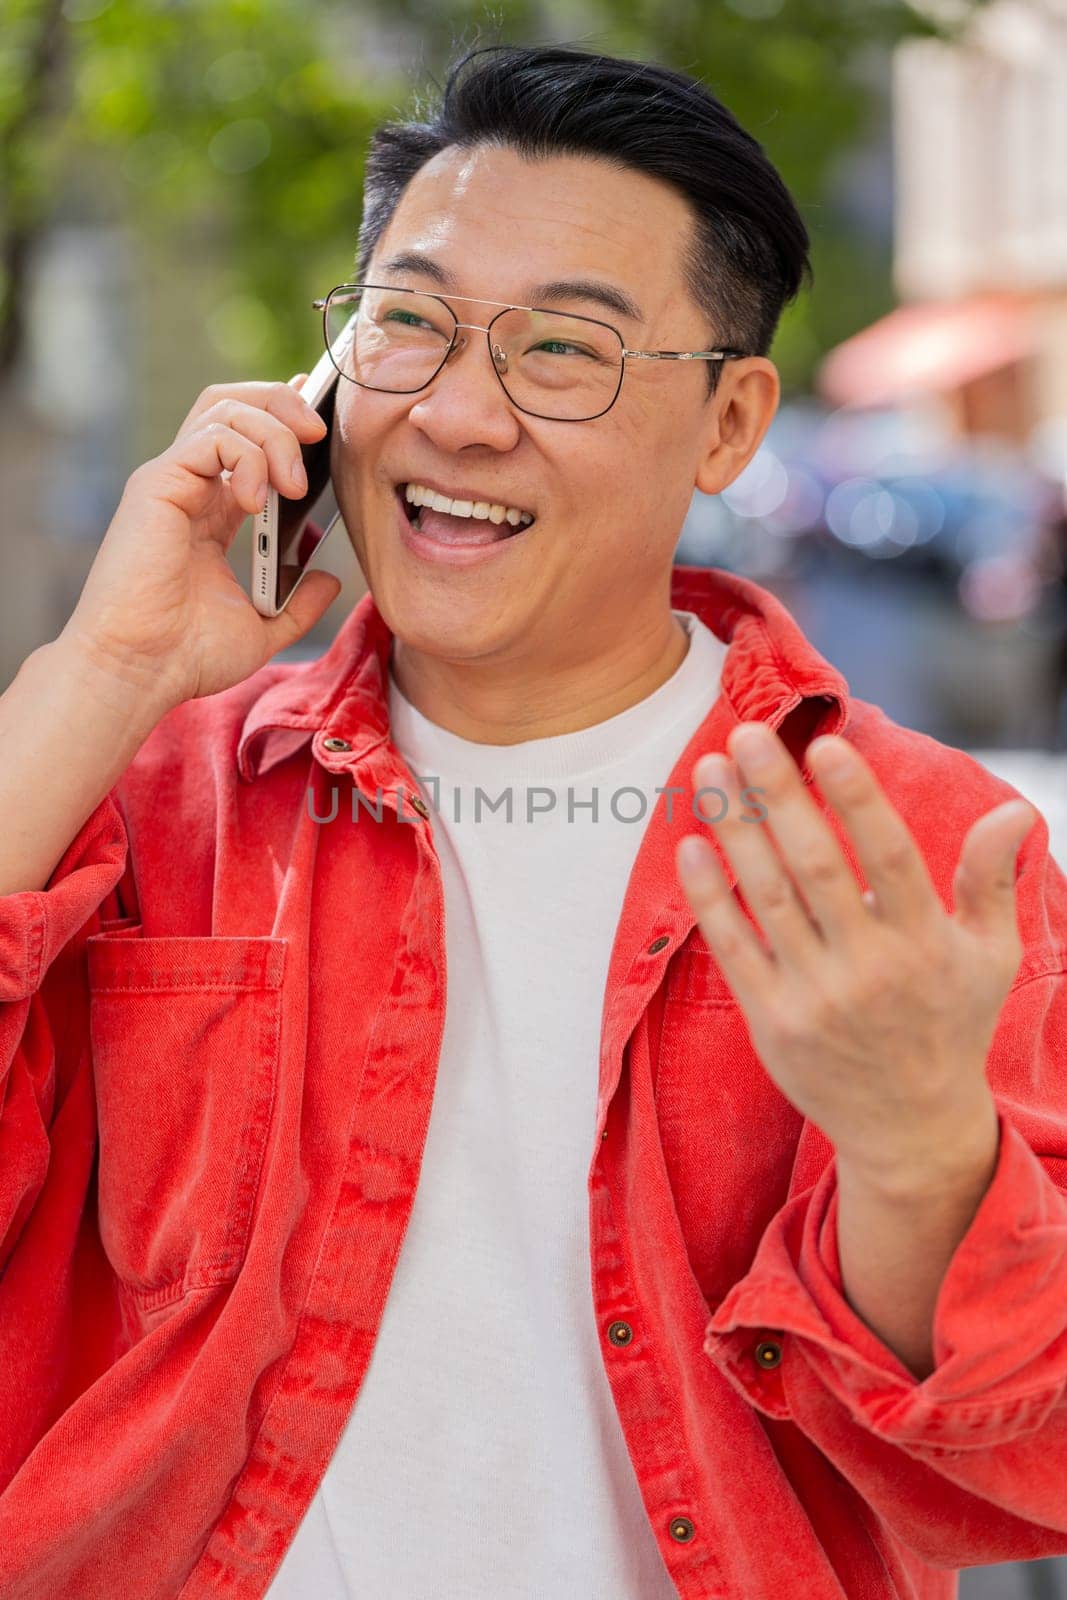 Happy Asian middle-aged man having remote conversation communicate speaking by smartphone outdoors. Japanese guy talking on phone unexpected good news gossip on city street. Town lifestyles. Vertical